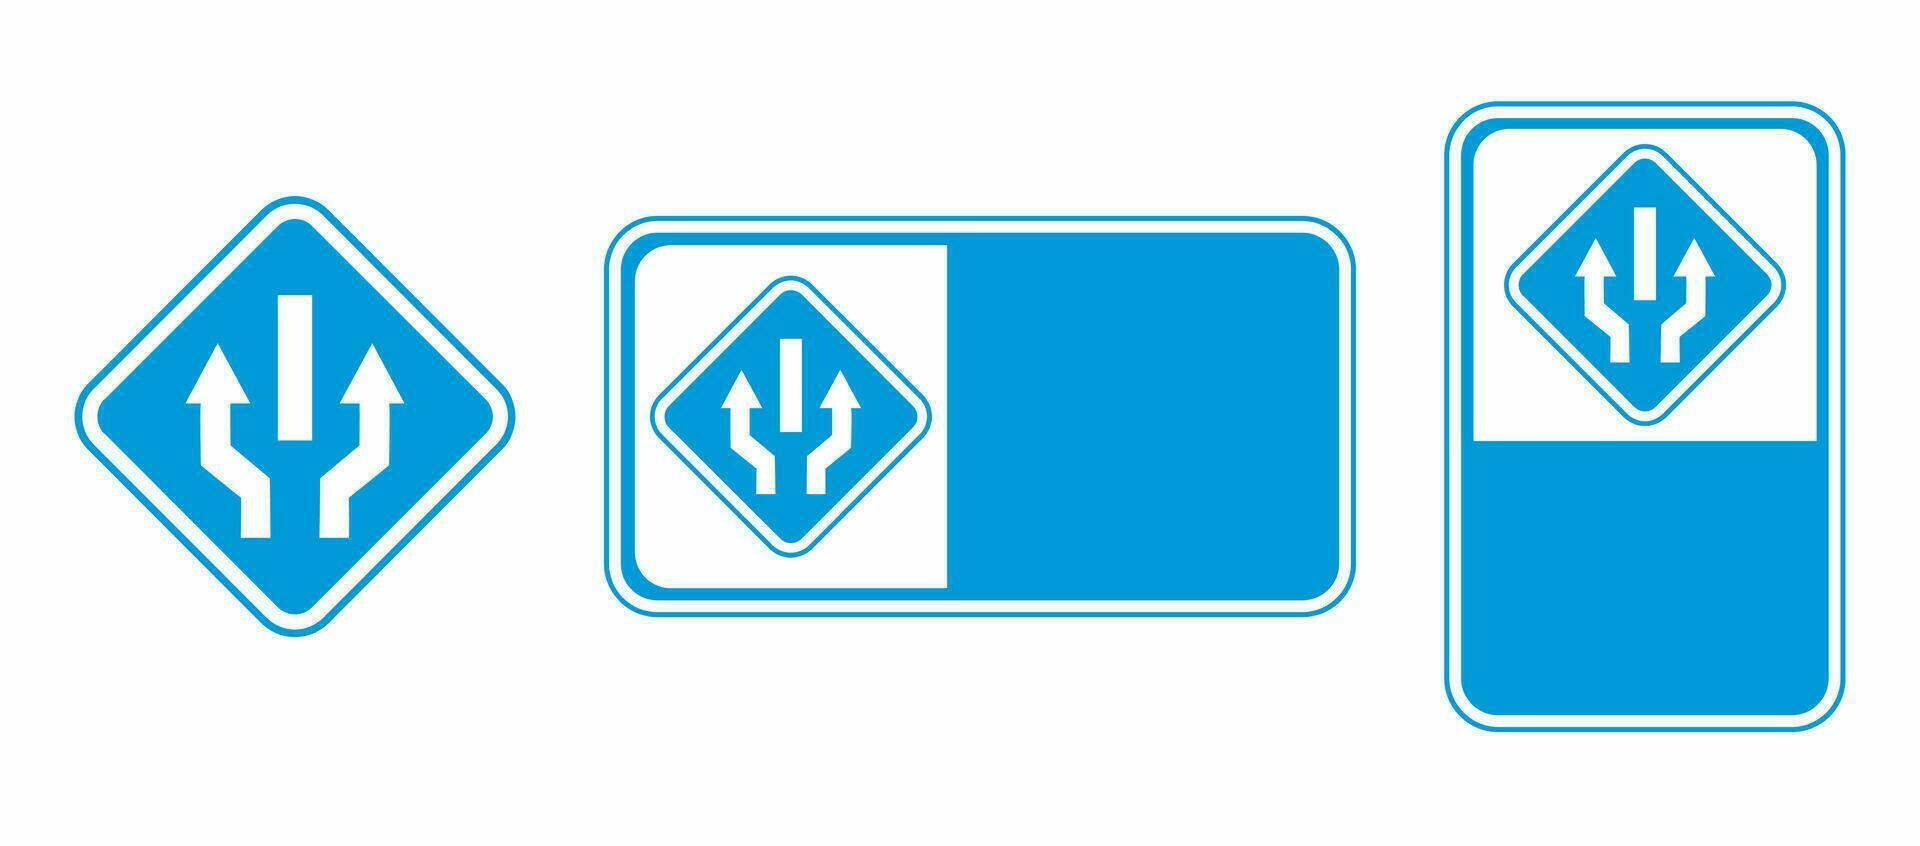 vector two way dividing traffic sign